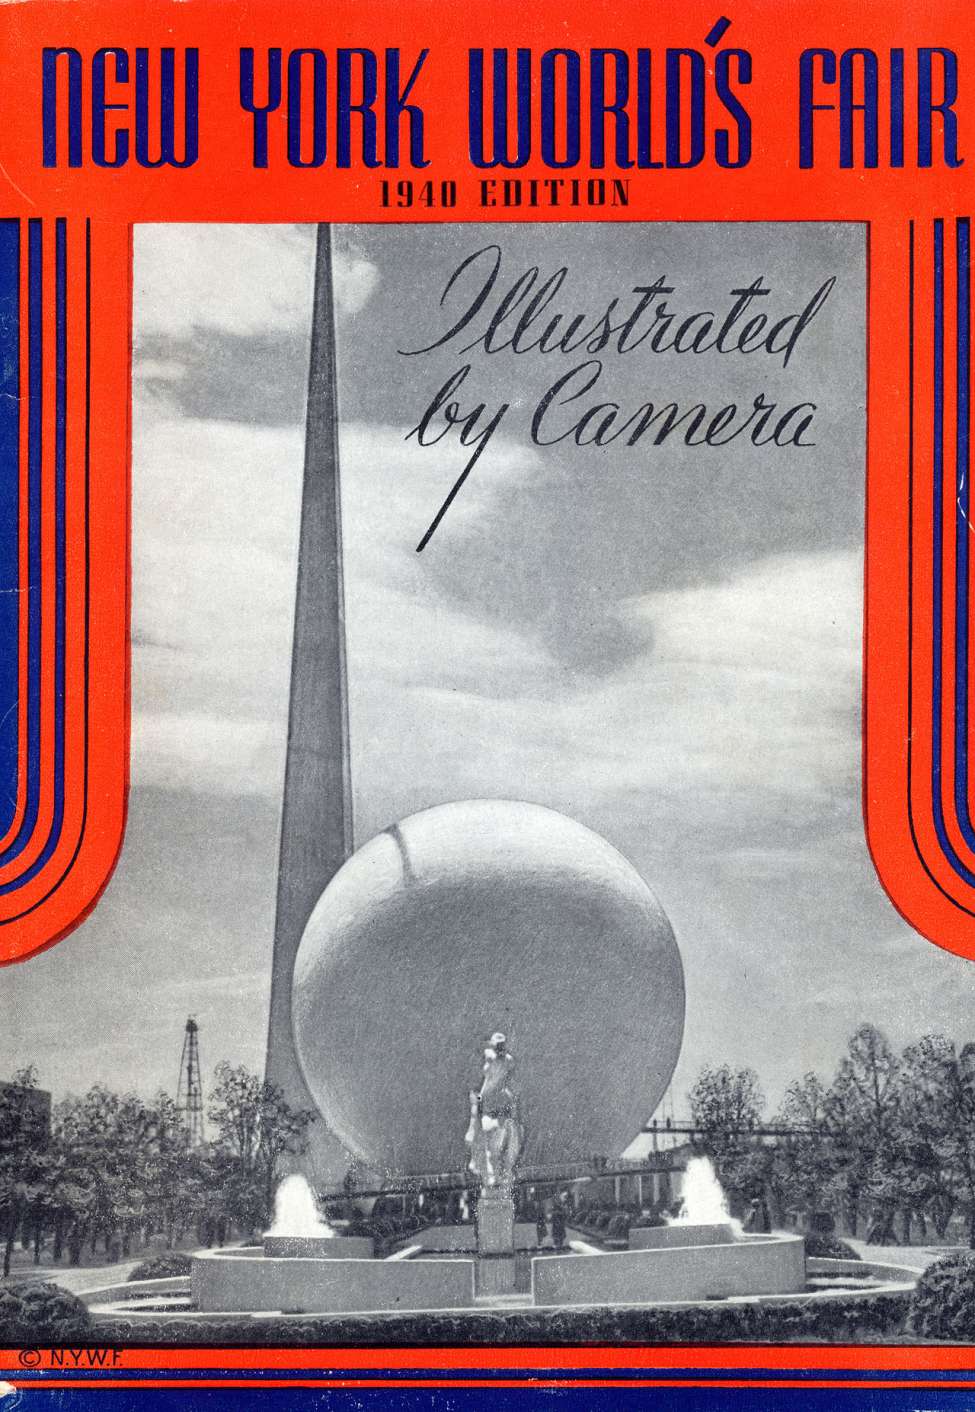 Book Cover For New York World's Fair - 1940 Edition